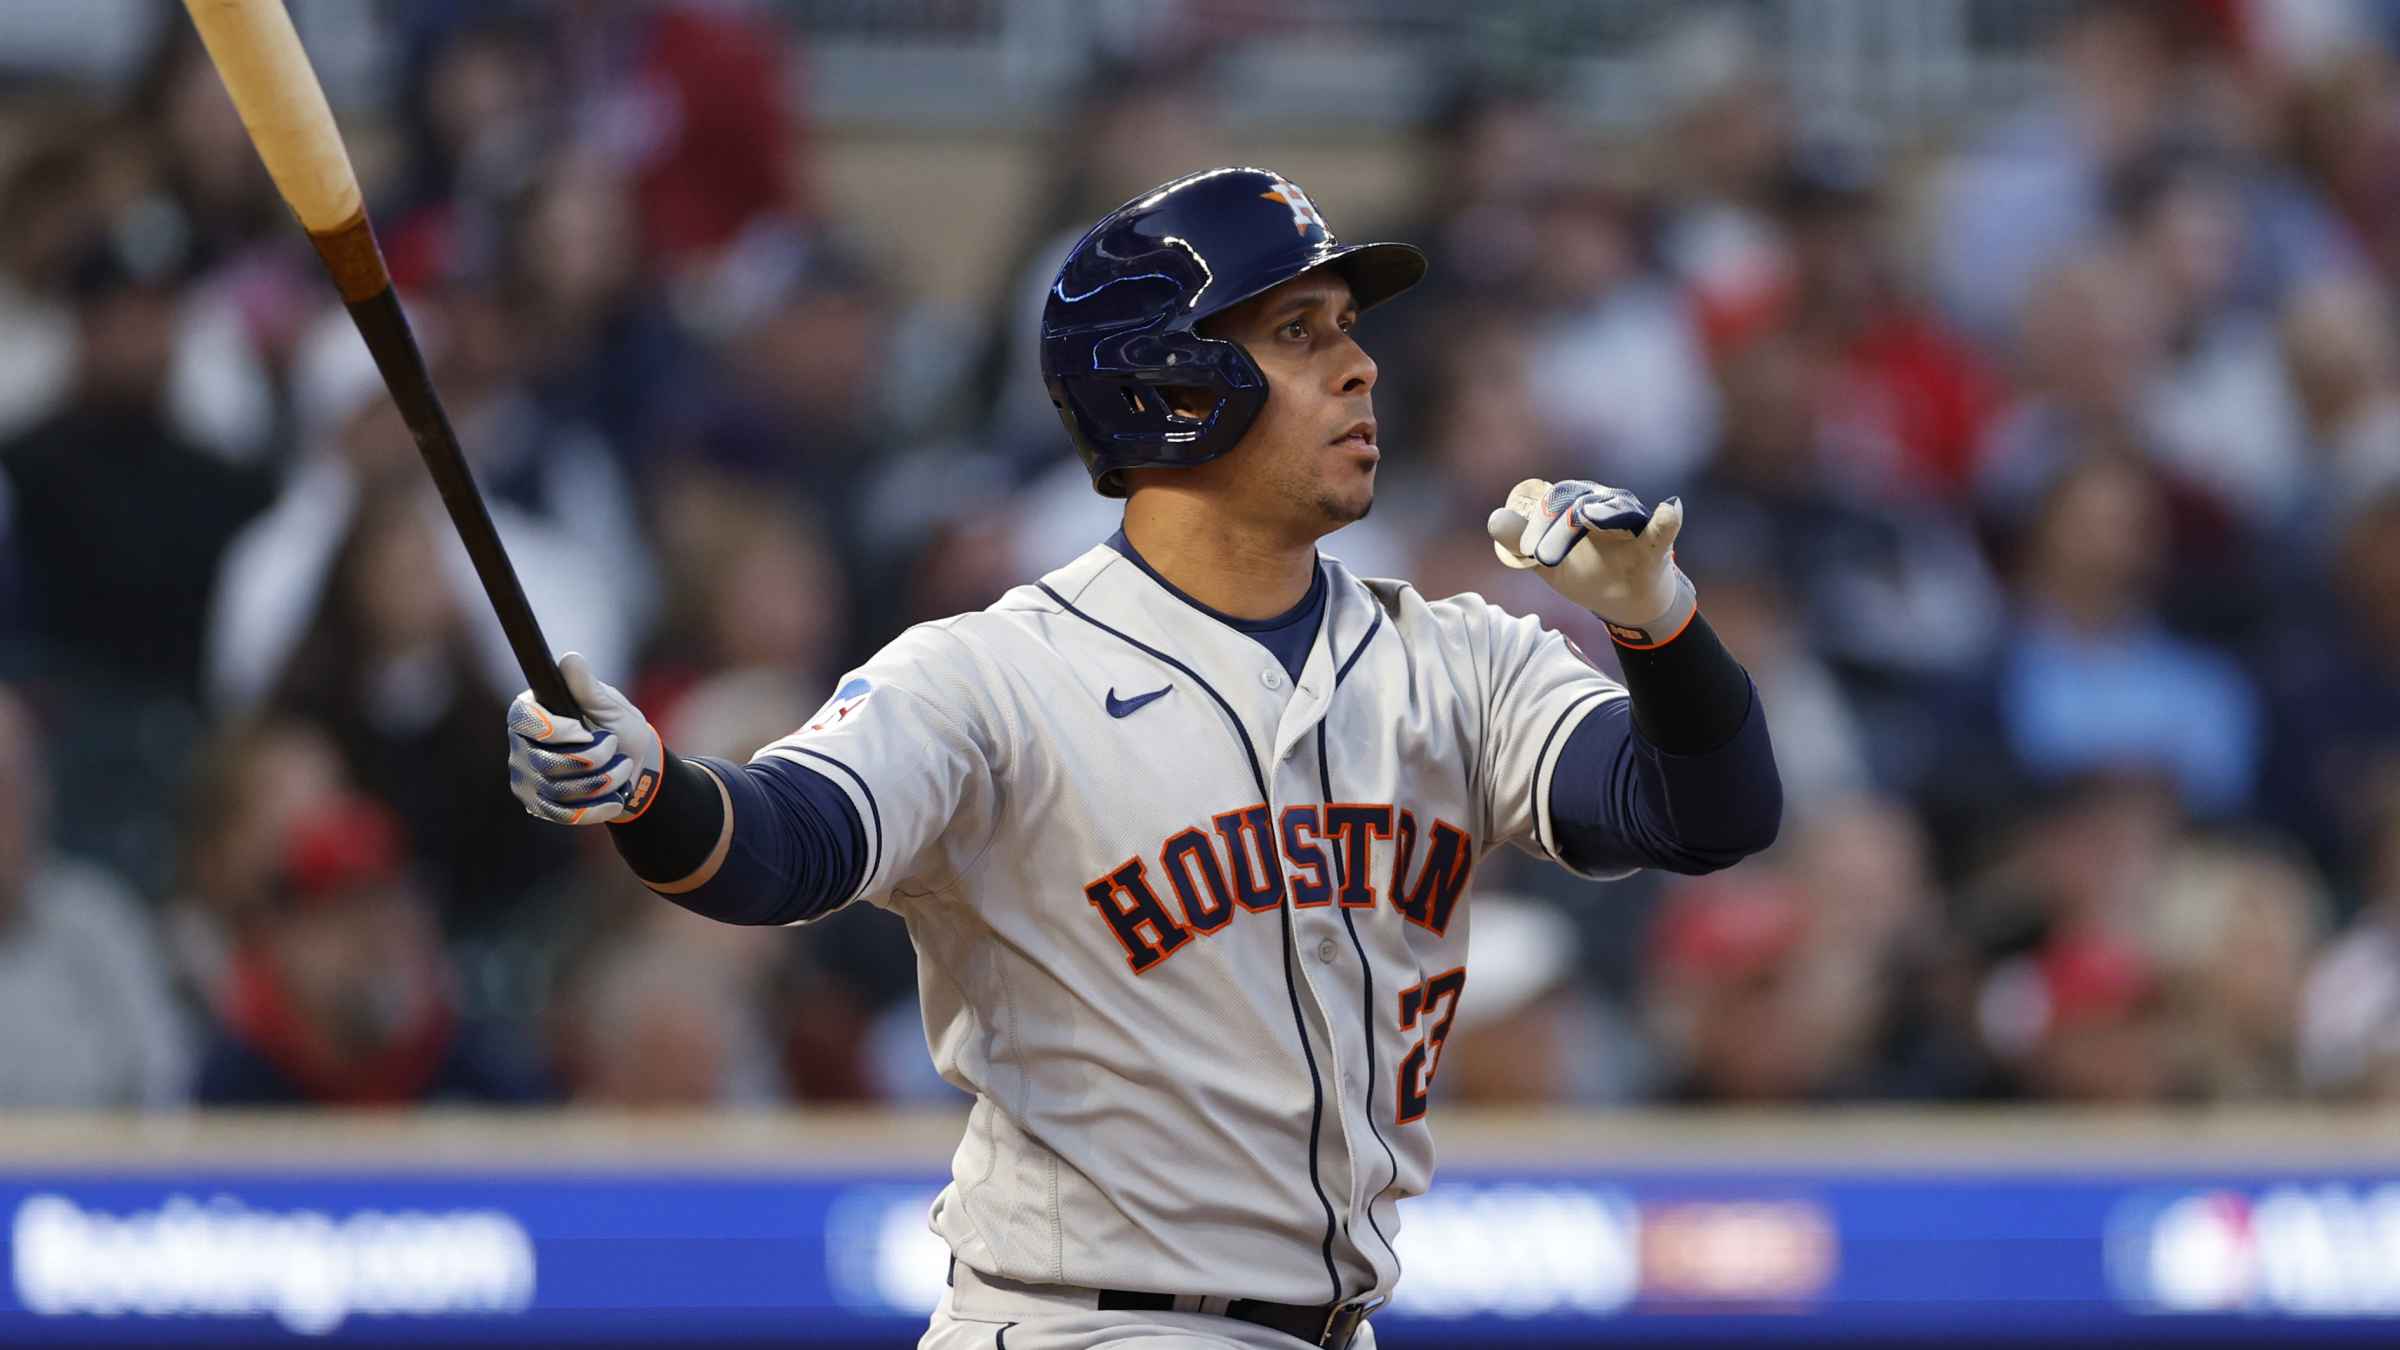 Michael Brantley CRUSHES a solo homer, bringing Astros to a 1-1 tie with  Twins